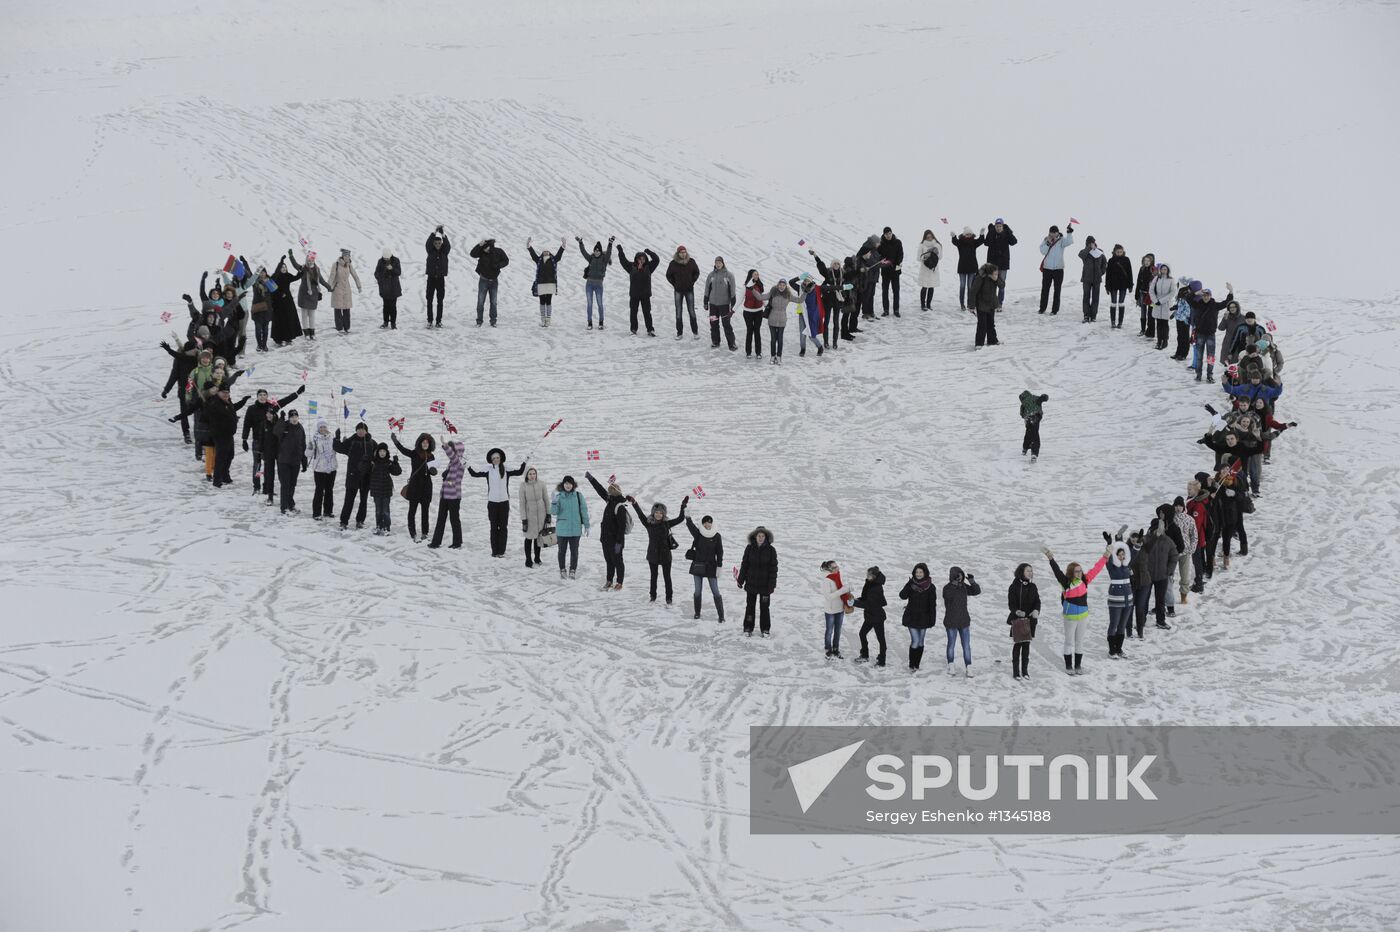 Flash mob to honor the signing of Kirkenes Declaration